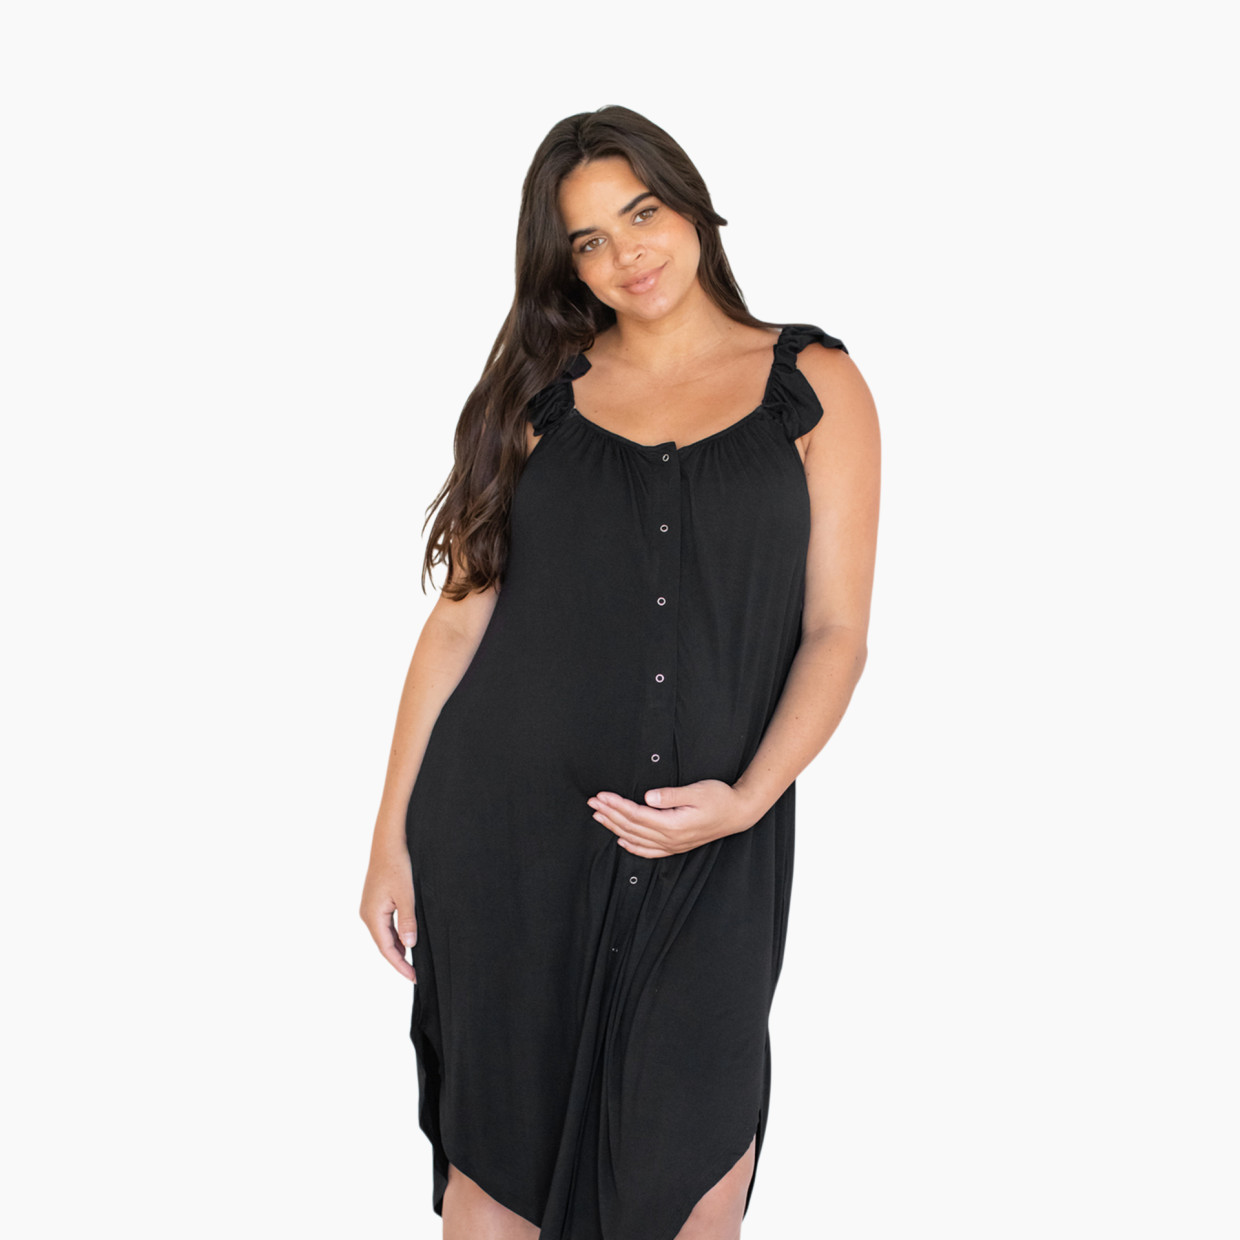 Kindred Bravely Ruffle Strap Labor & Delivery Gown - Black, Medium/Large.